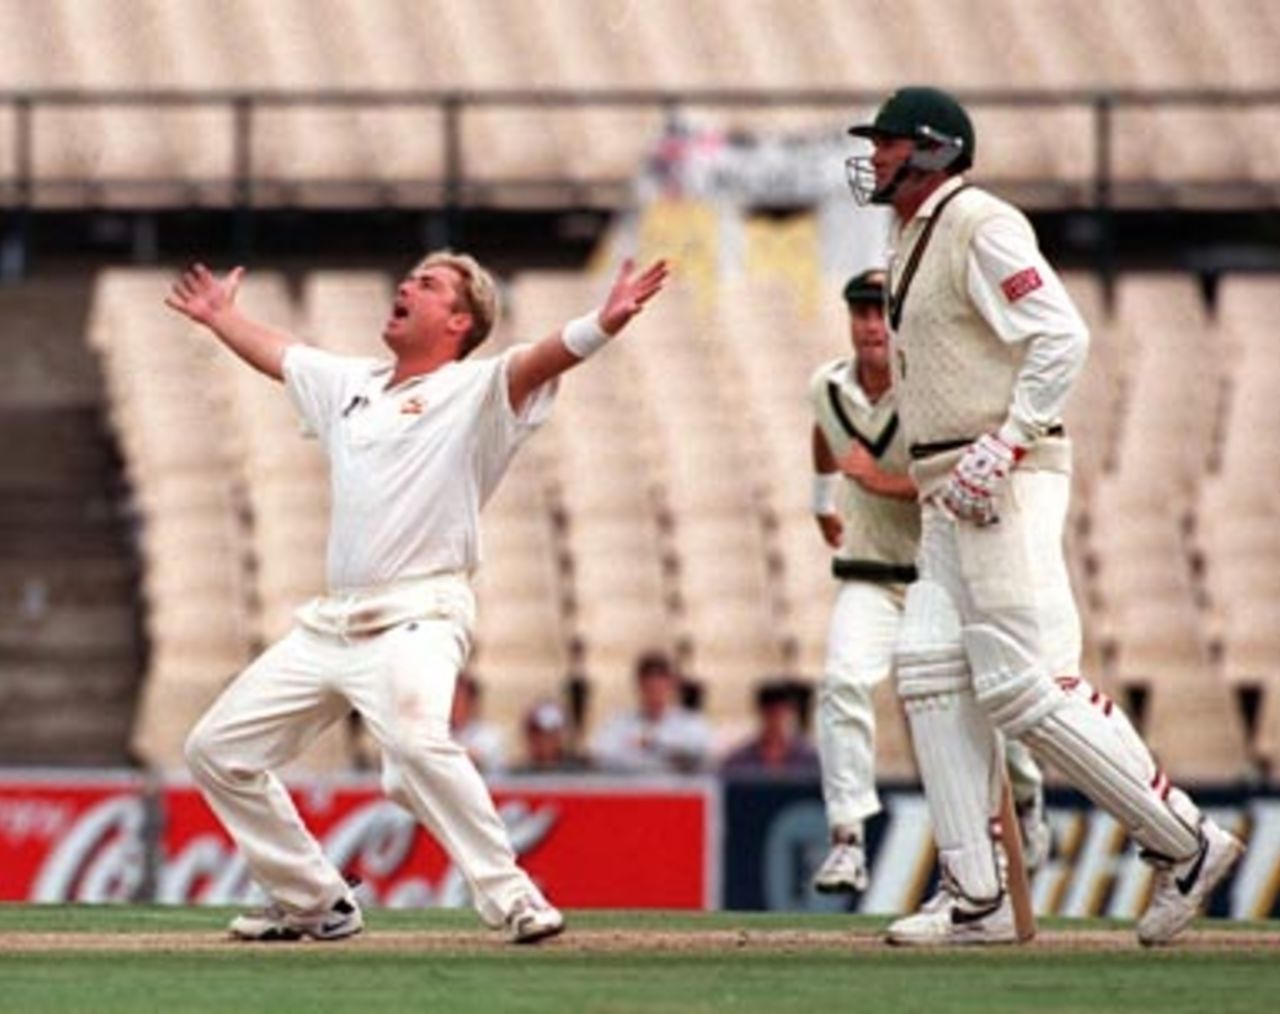 Shane Warne looks to the heavens after clean bowling Jacques Kallis to take his 300th Test wicket... Australia v South Africa, 2nd Test Day 4 at the SCG, Monday January 5th 1998.